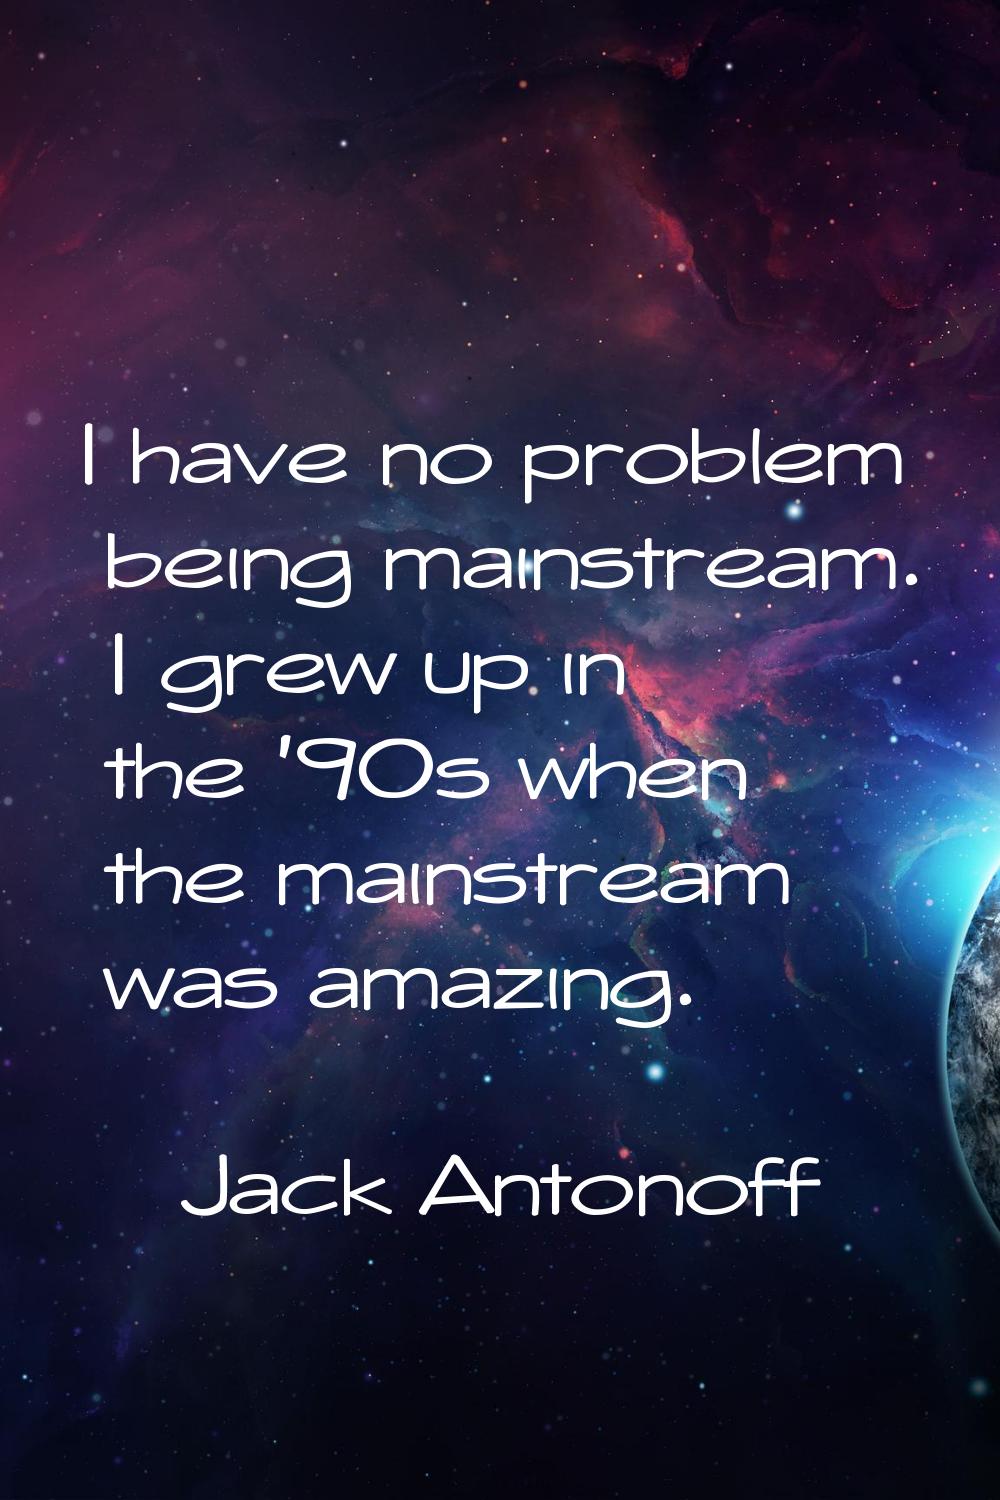 I have no problem being mainstream. I grew up in the '90s when the mainstream was amazing.